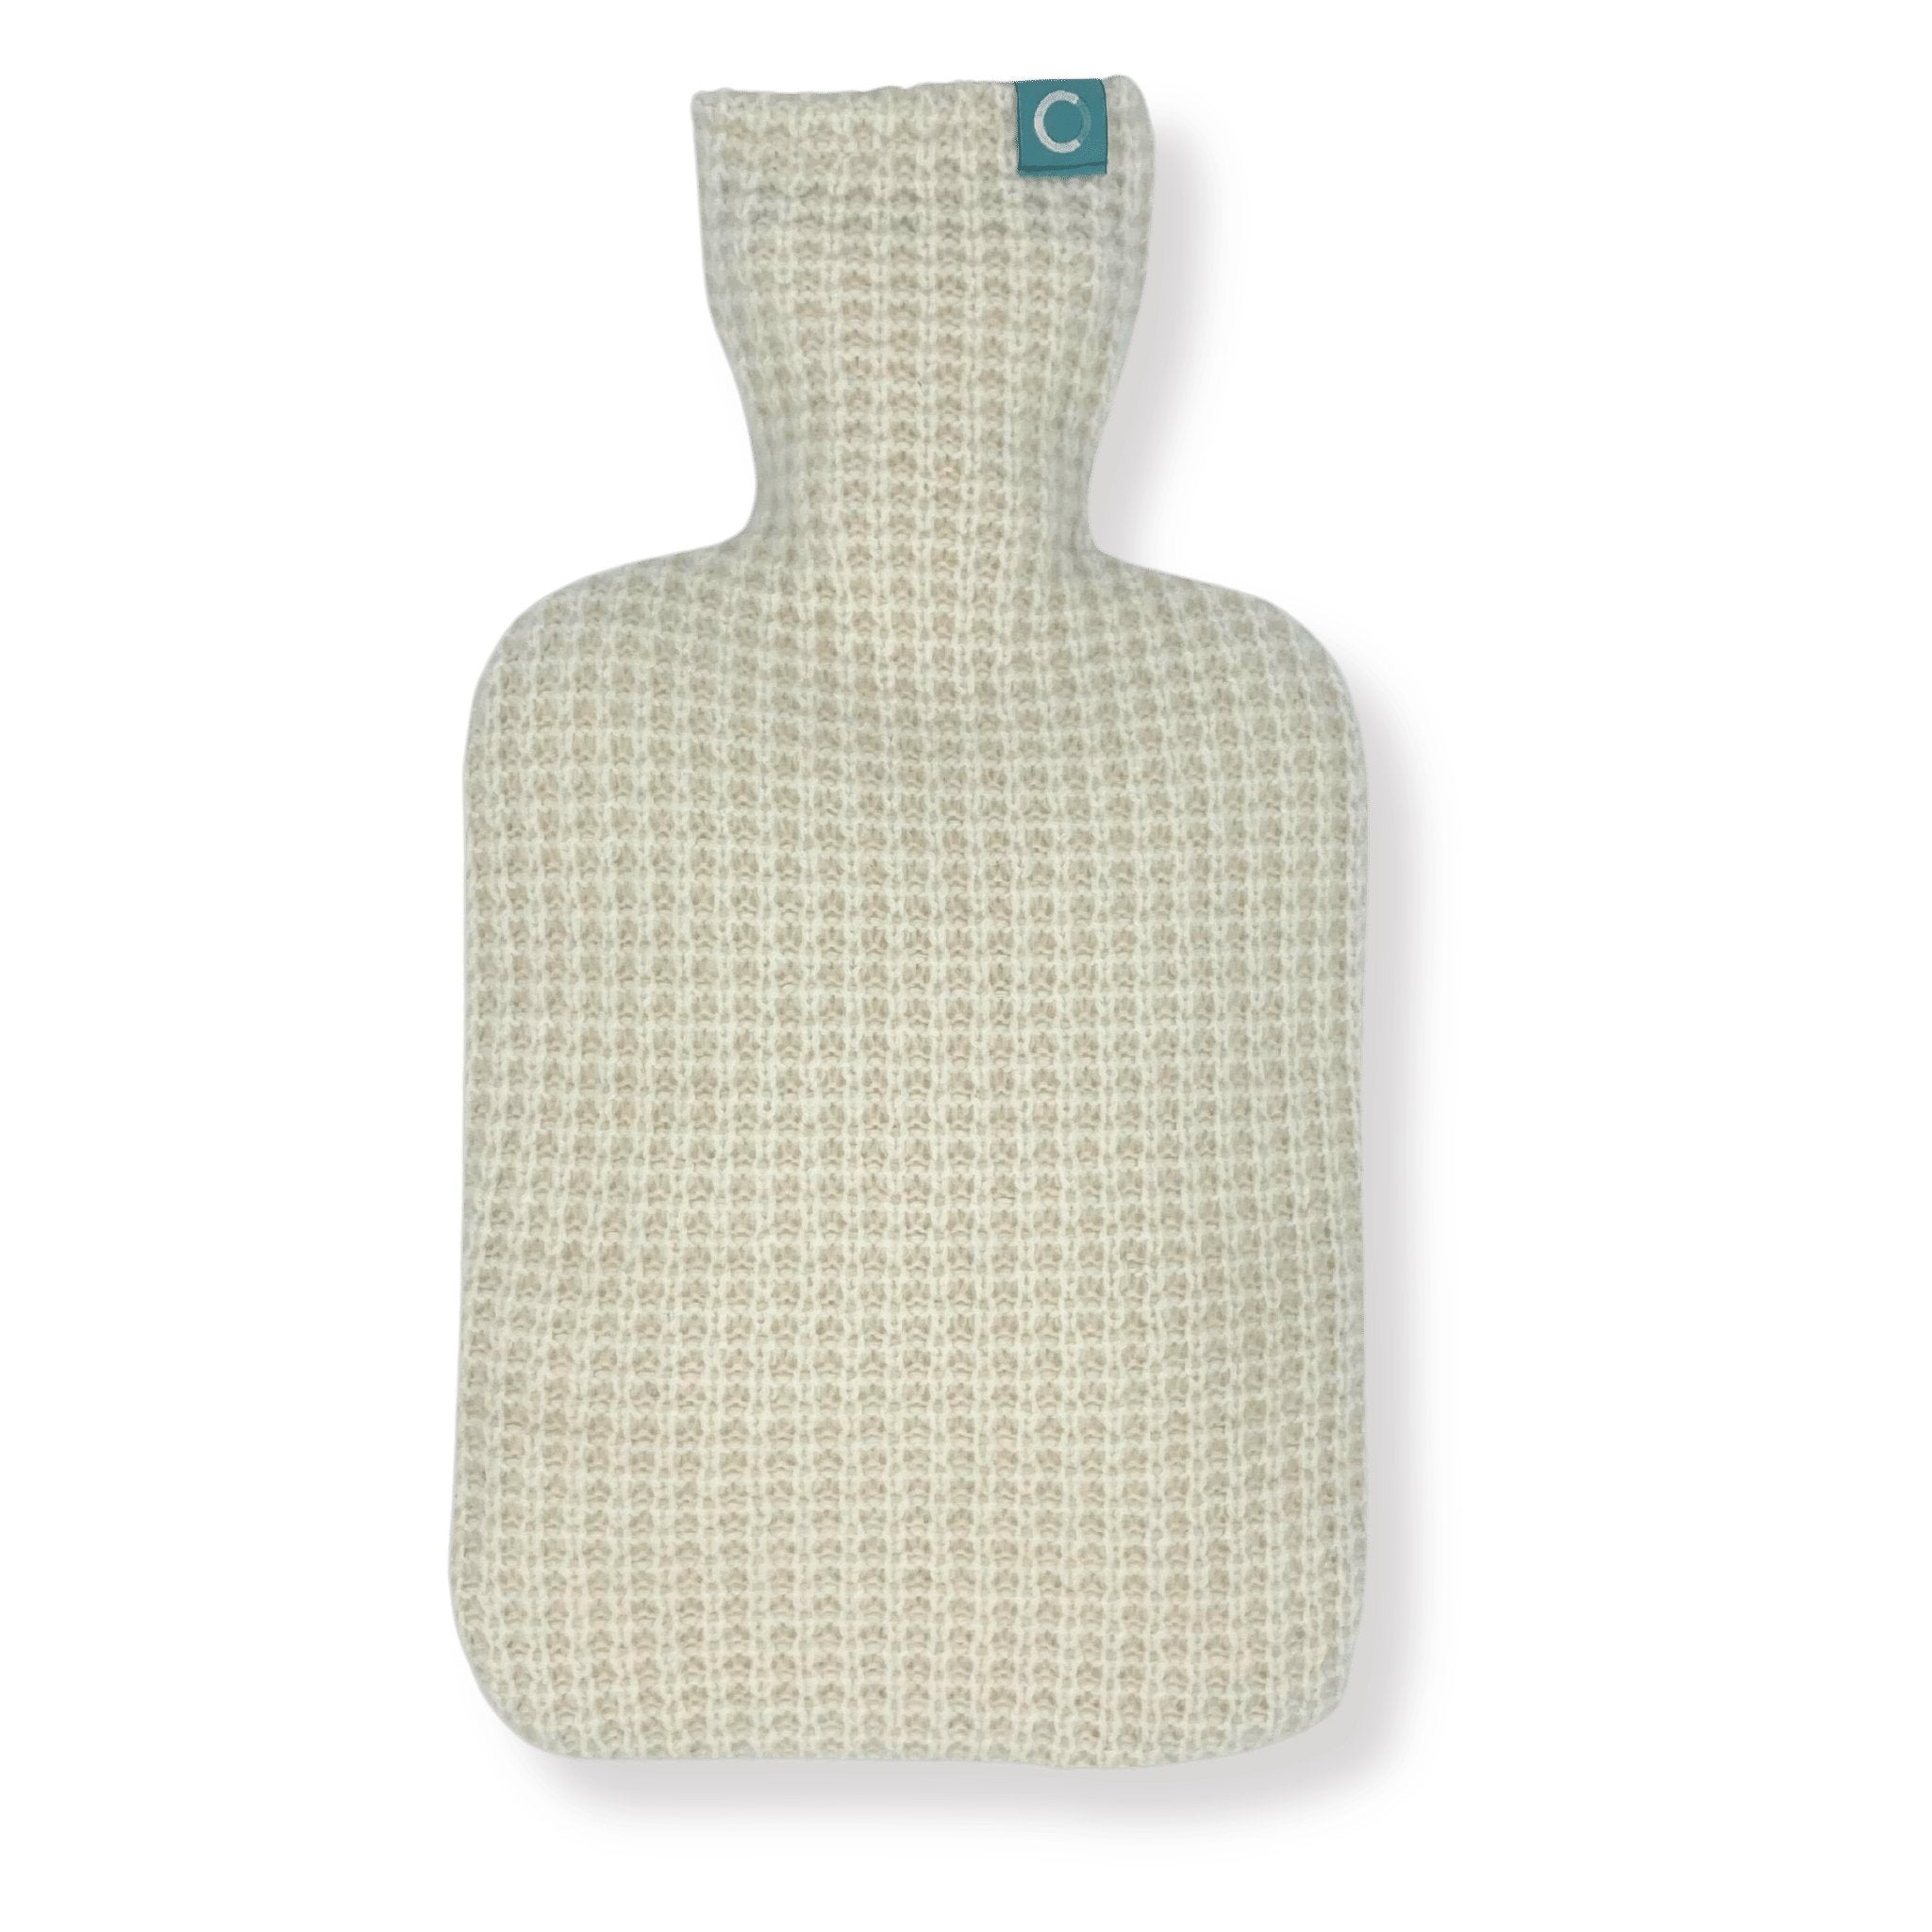 Recycled Cashmere Hot-water Bottle Cover - Cream - Cashmere Circle